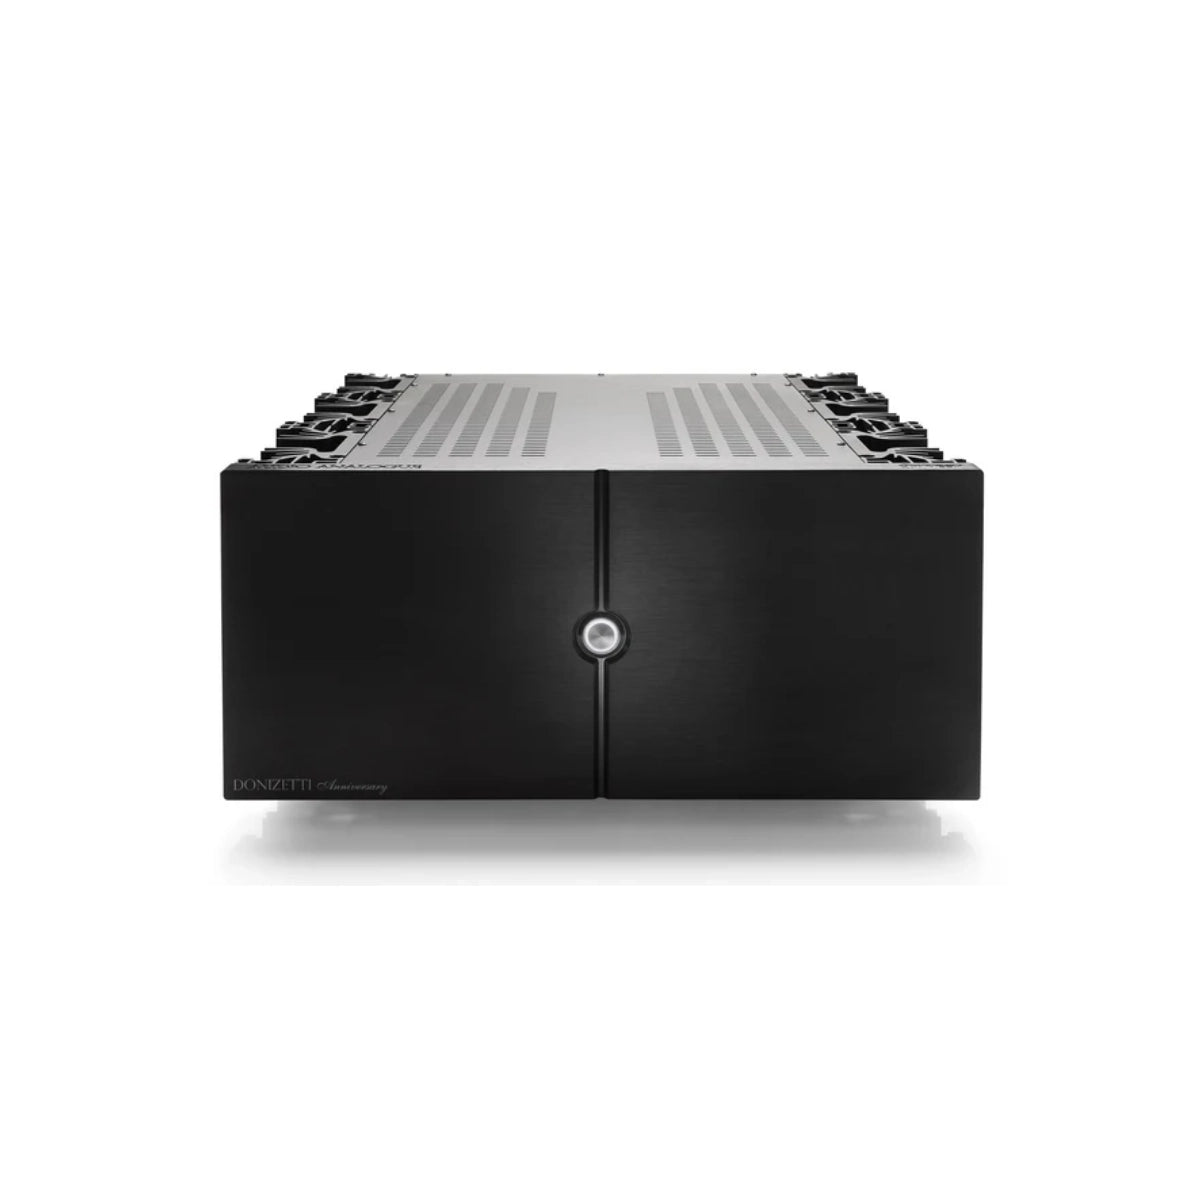 An image of Audio Analogue's Donizetti 250W amplifier in black finish.